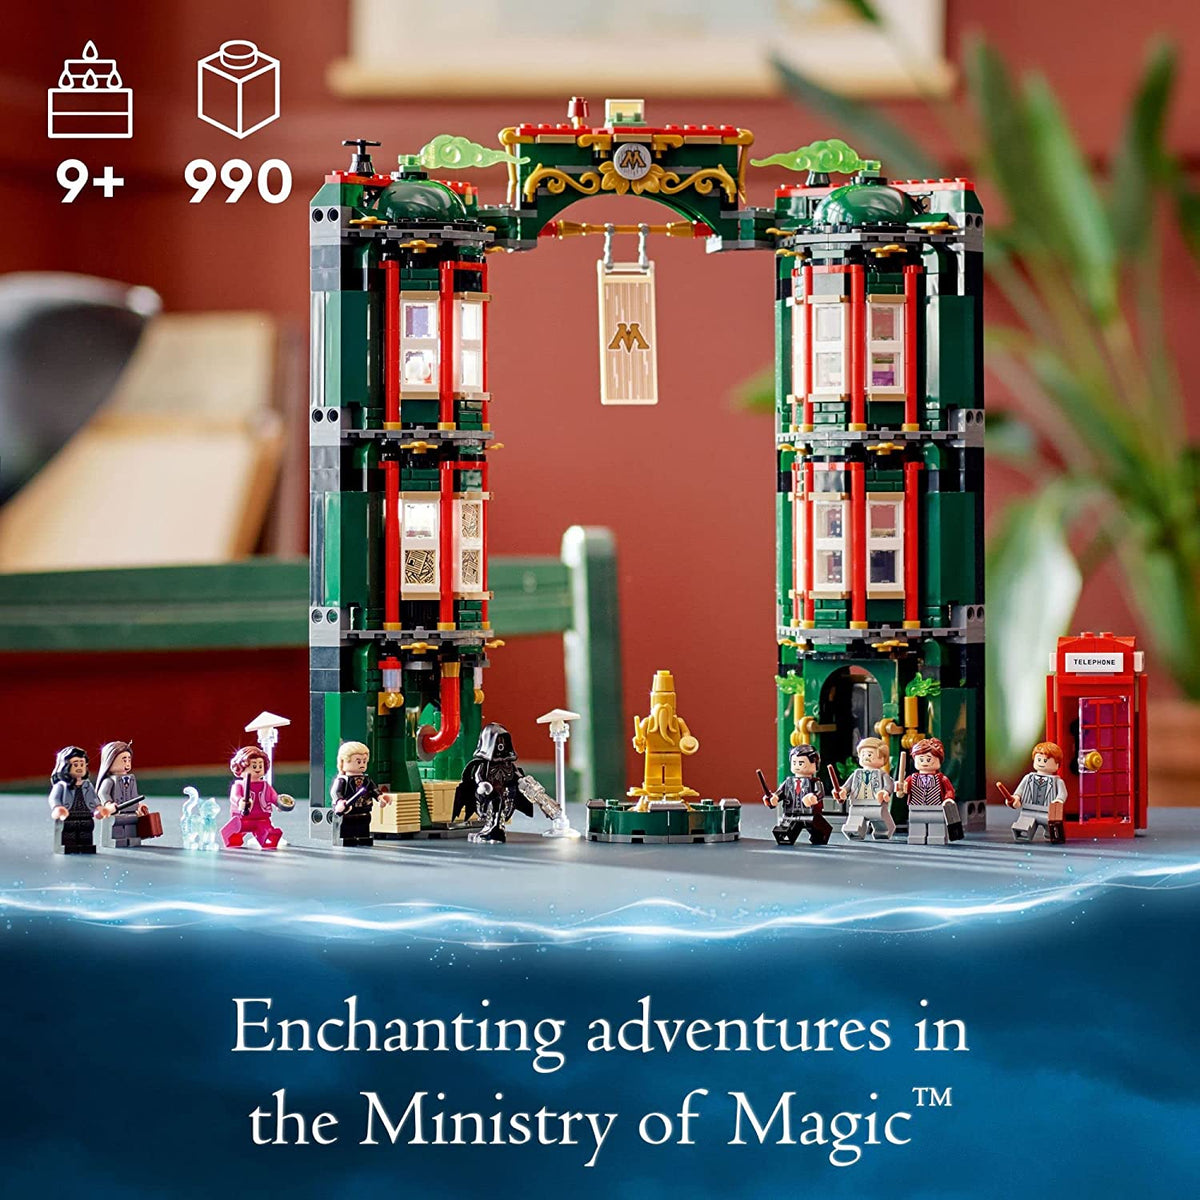 HARRY POTTER 76403: The Ministry of Magic